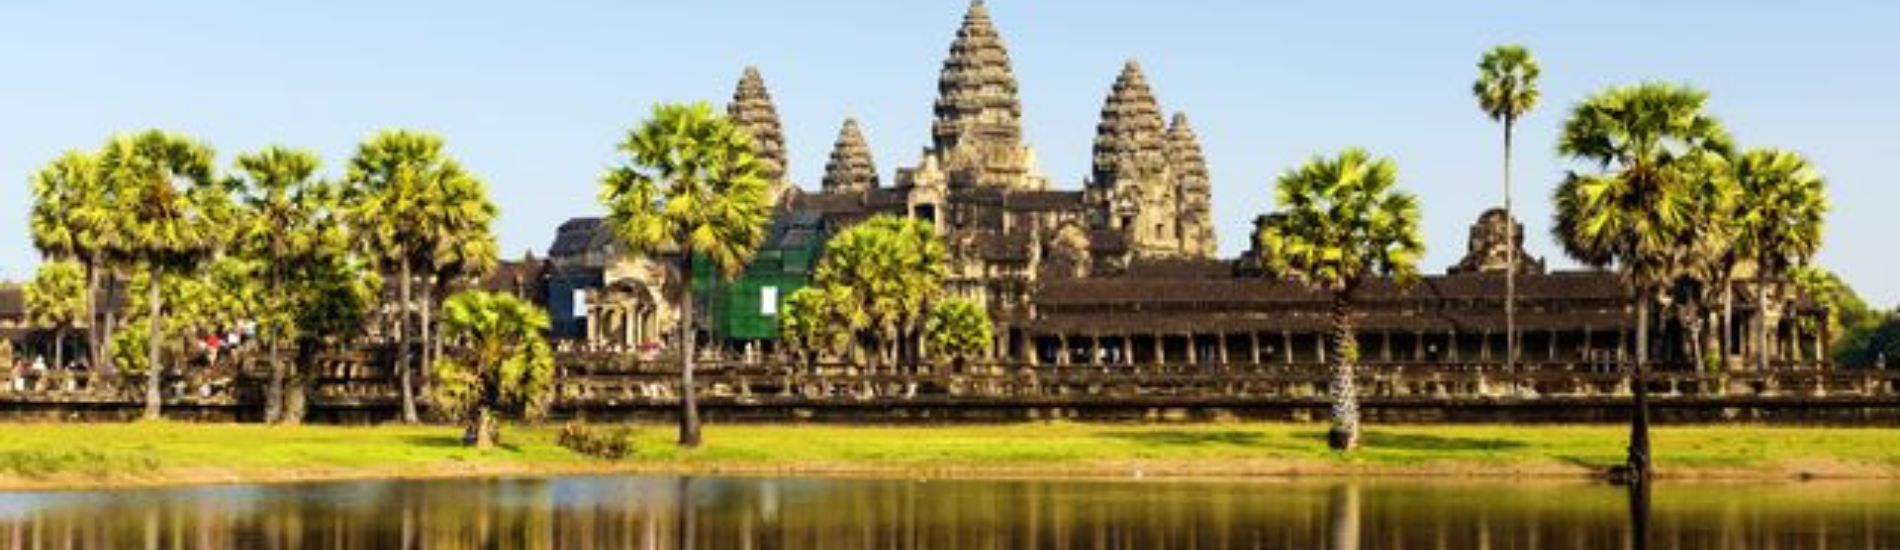 5-Day Classic Cambodian Tour by Bus from Phnom Penh